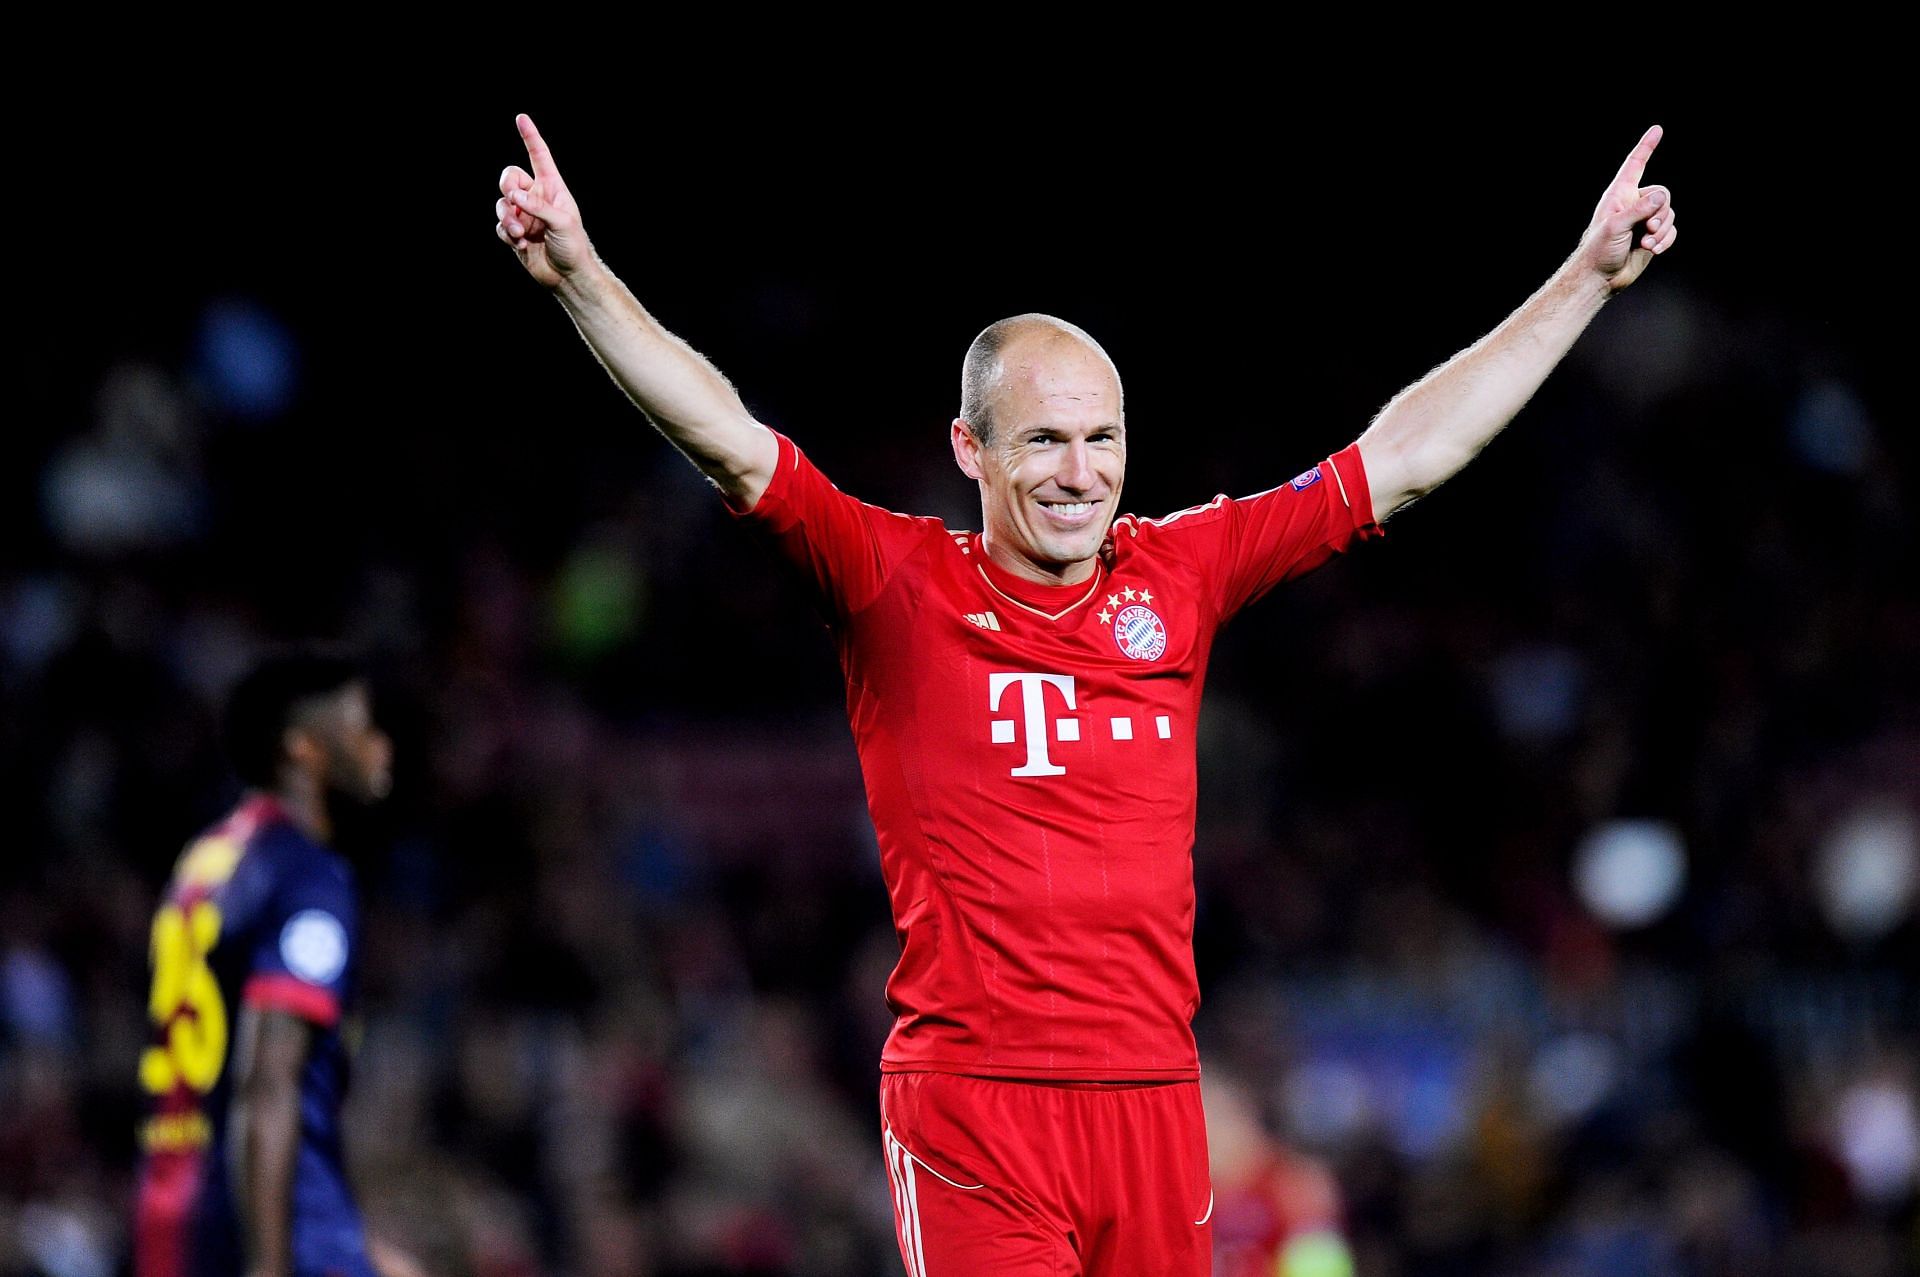 Robben in action against Barcelona at the UEFA Champions League